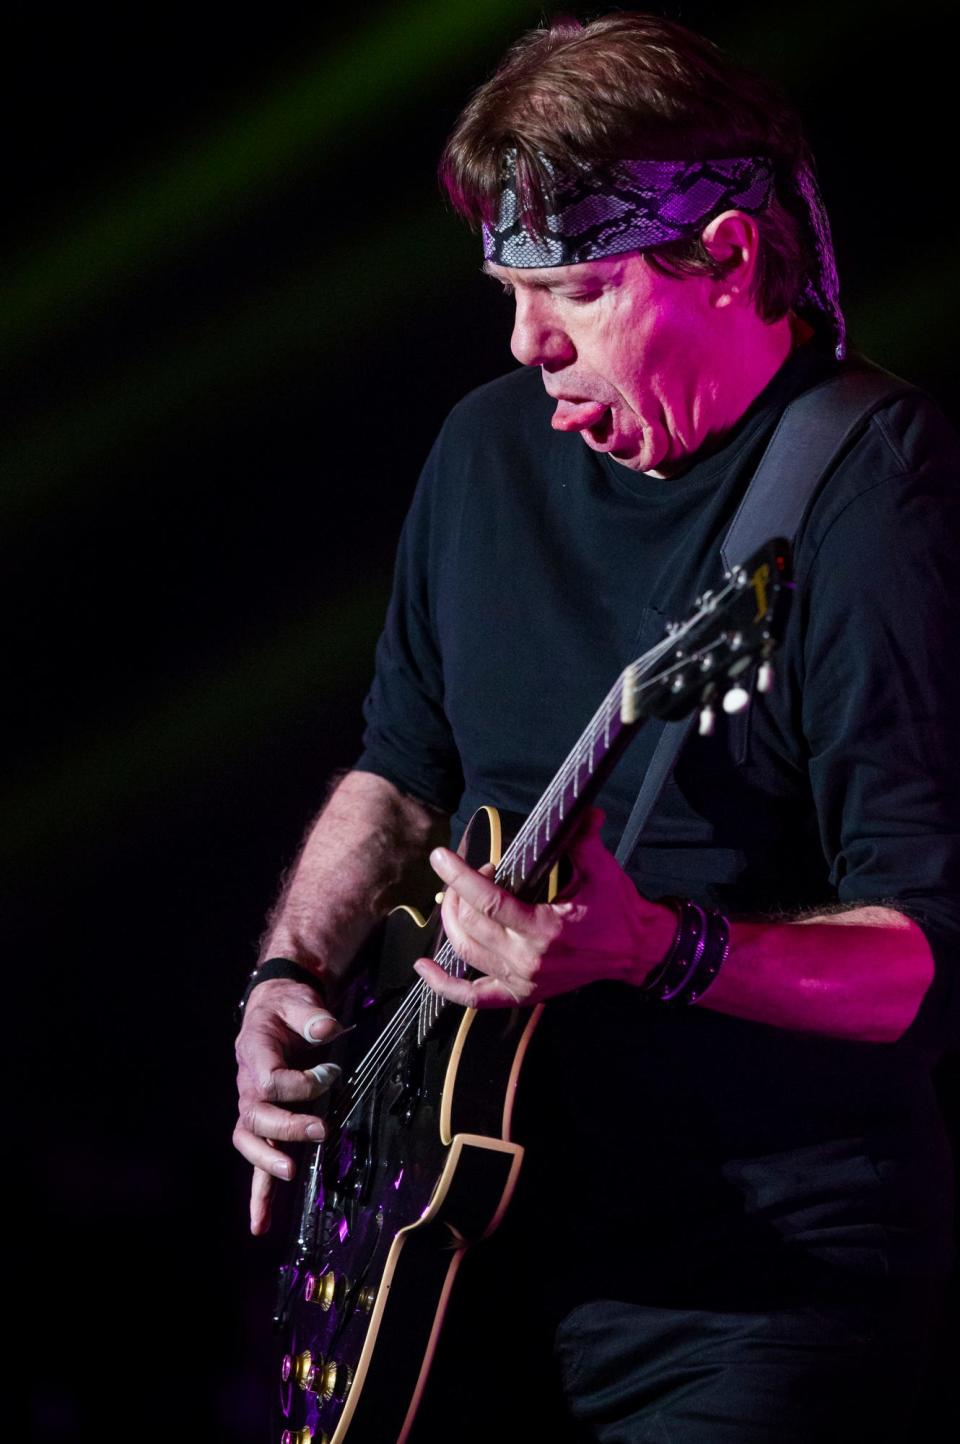 George Thorogood and the Destroyers perform at the Grand Opera House in Wilmington on Tuesday, March 10, 2015.